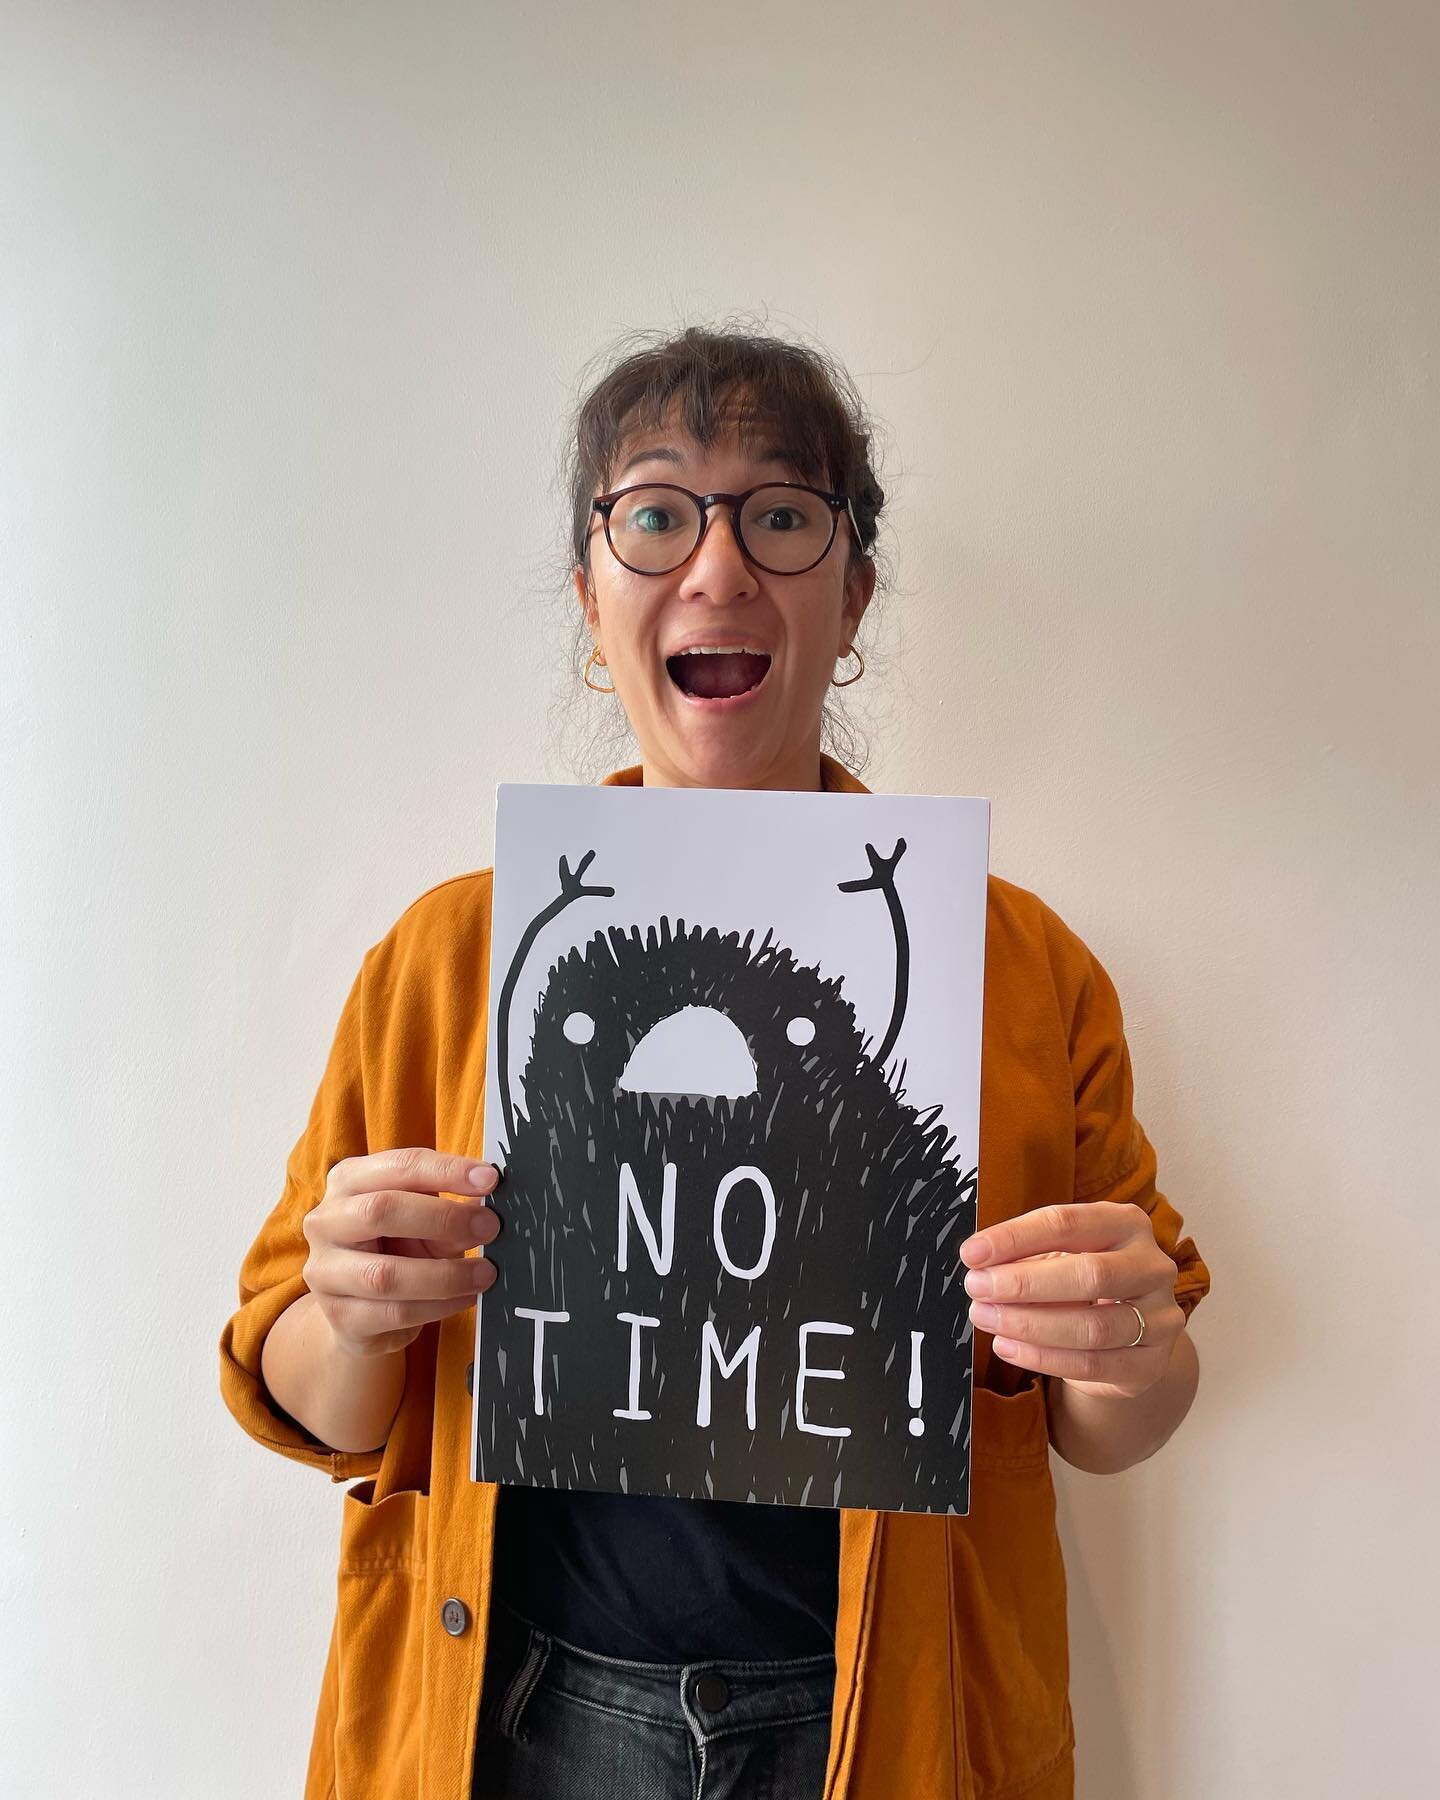 &ldquo;NO TIME!!!&rdquo; If, like Katy, you&rsquo;re someone who feels like there just aren&rsquo;t enough hours in a day, you&rsquo;re going to want to listen to today&rsquo;s new episode. This week we hear about how the city of Barcelona is rethink